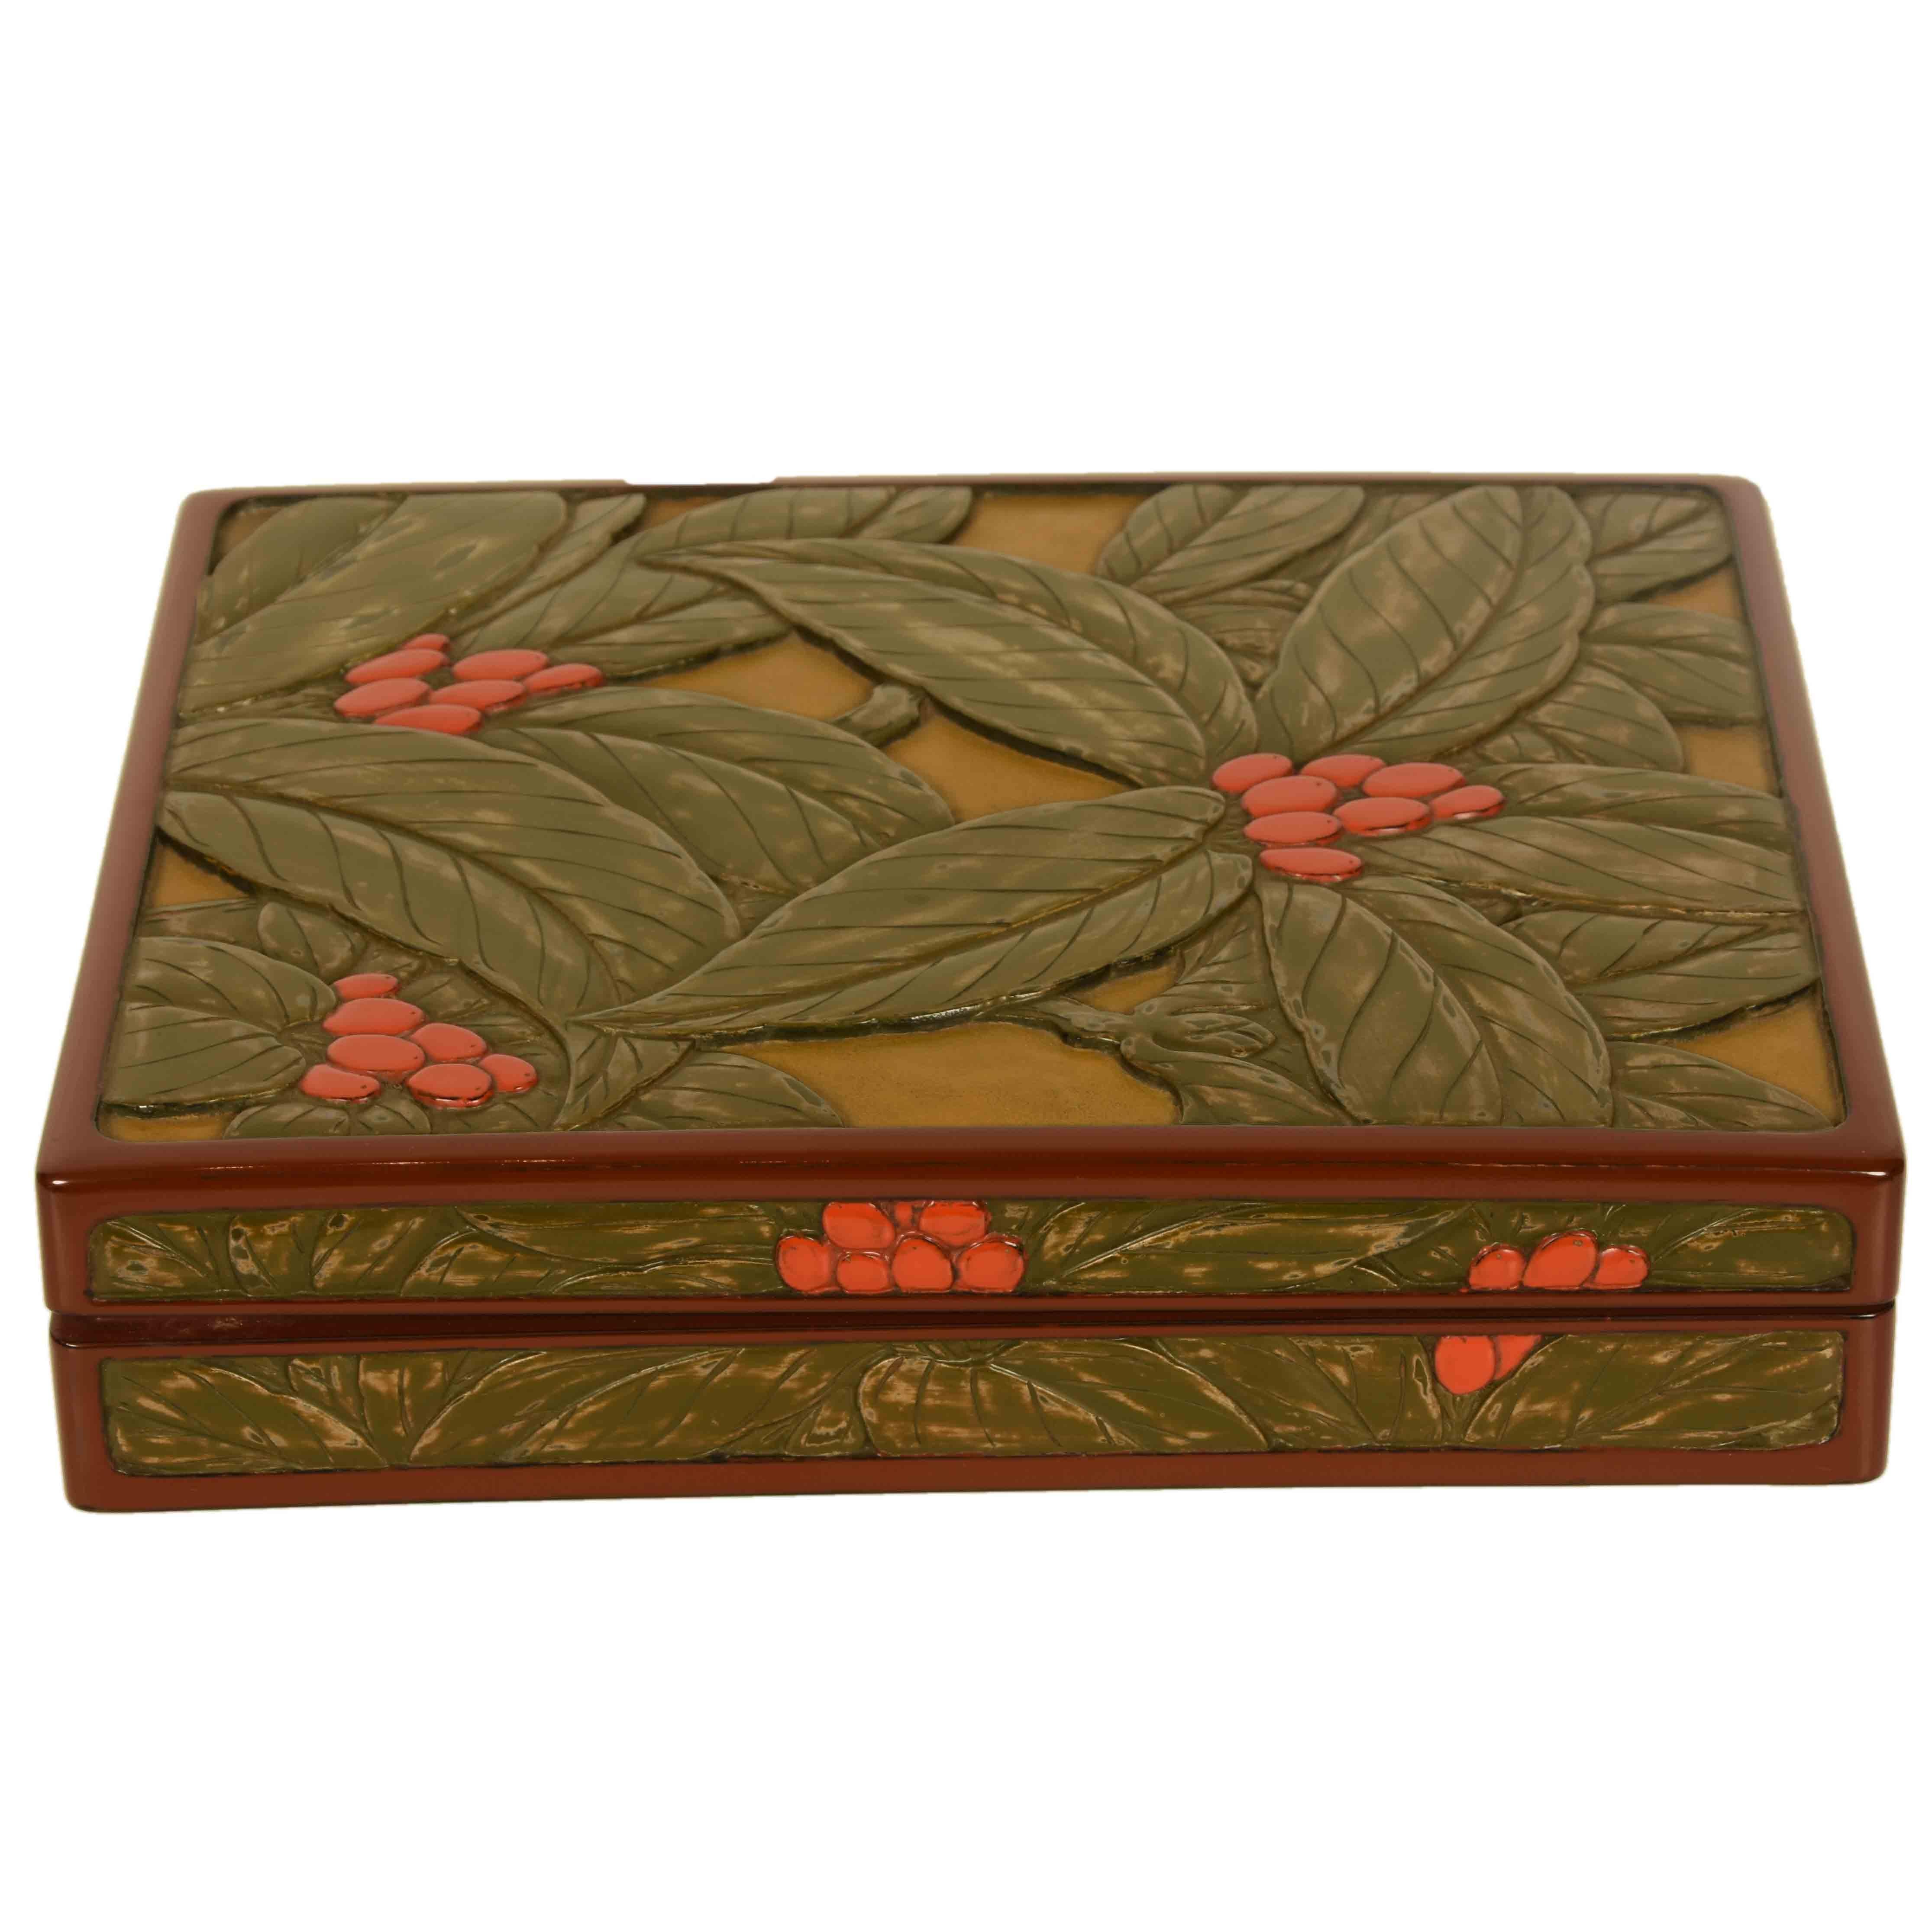 20th Century Japanese Carved Kamakura Lacquer Box with Botanical Design by Tamerou Ono For Sale